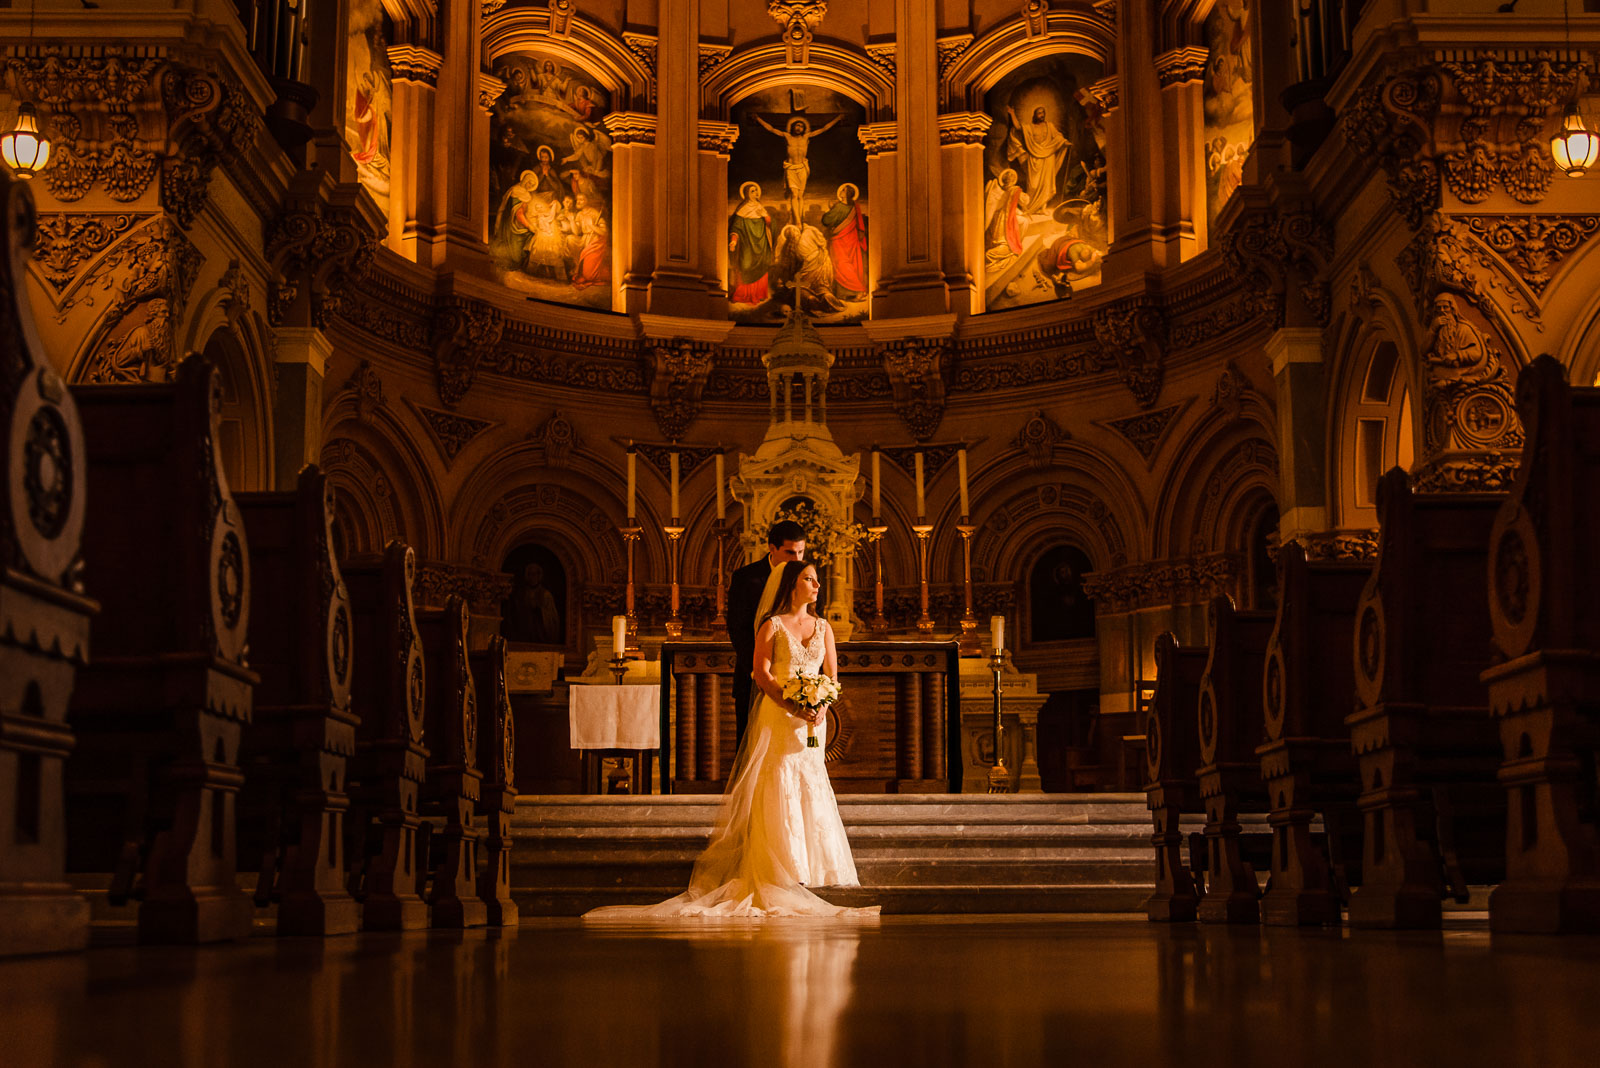 Bride and groom portrait in church